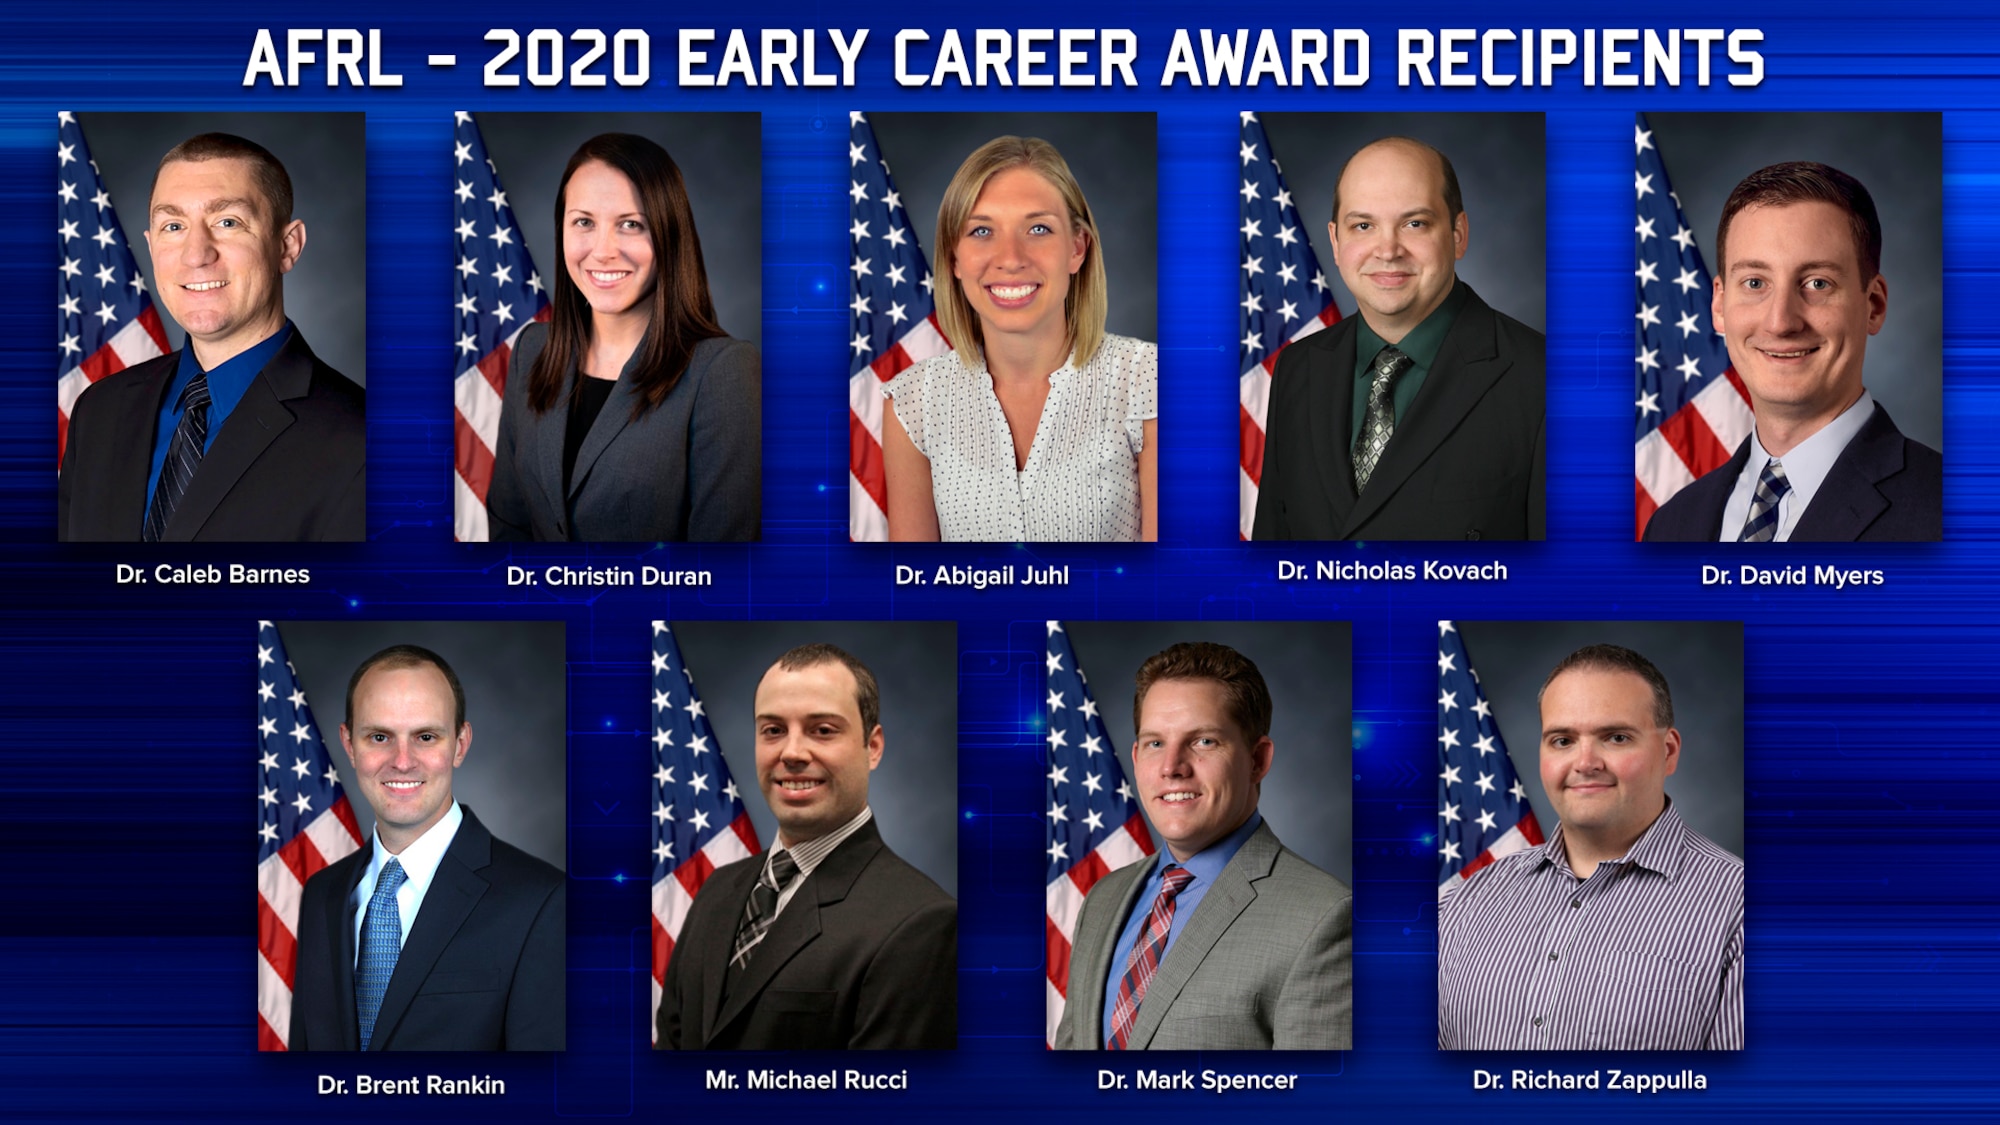 The winners of the 2020 Air Force Research Laboratory Early Career Awards are Dr. Caleb Barnes, Dr. Christin Duran, Dr. Abigail Juhl, Dr. Nicholas Kovach, Dr. David Myers, Dr. Brent Rankin, Mr. Michael Rucci, Dr. Mark Spencer and Dr. Richard Zappulla. (U.S. Air Force Photo Illustration/Patrick Londergan)